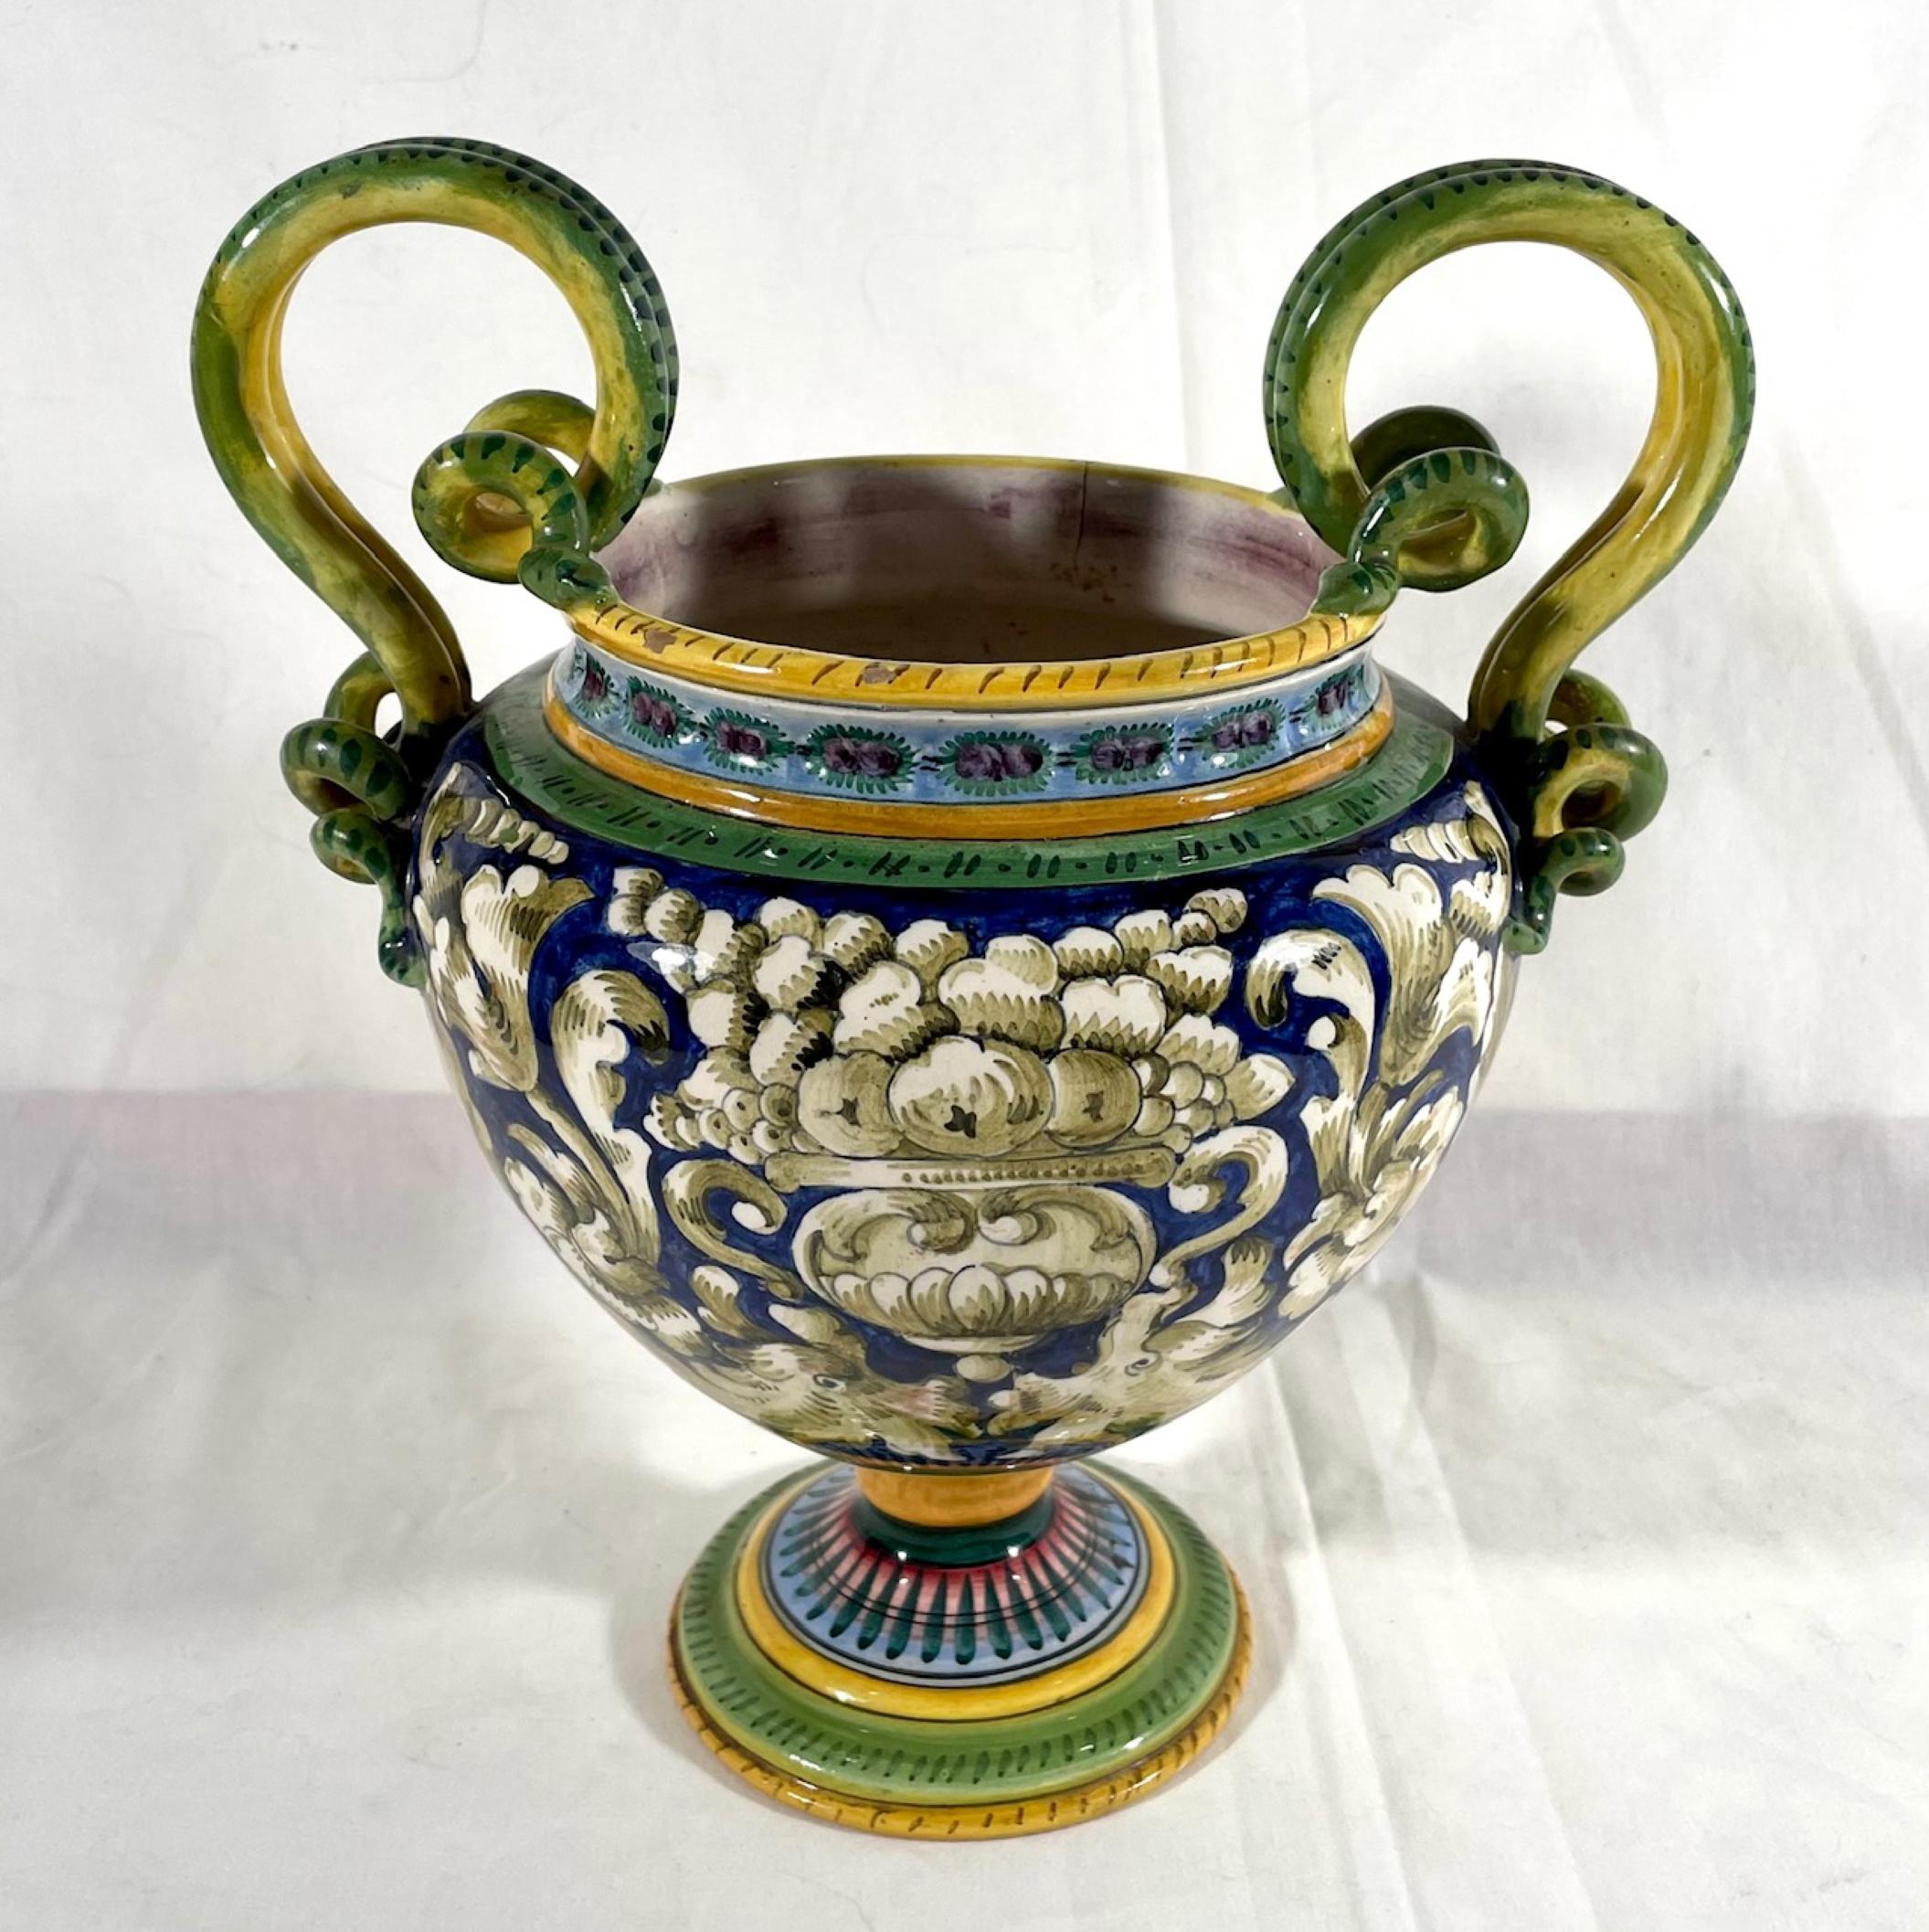 Vintage Italian Majolica two-handled urn

Charming vintage Italian Majolica two handled urn. This lovely vintage bulbous urn is hand decorated with acanthus leaves and overflowing fruited urns against a rich dark blue background. Two extended